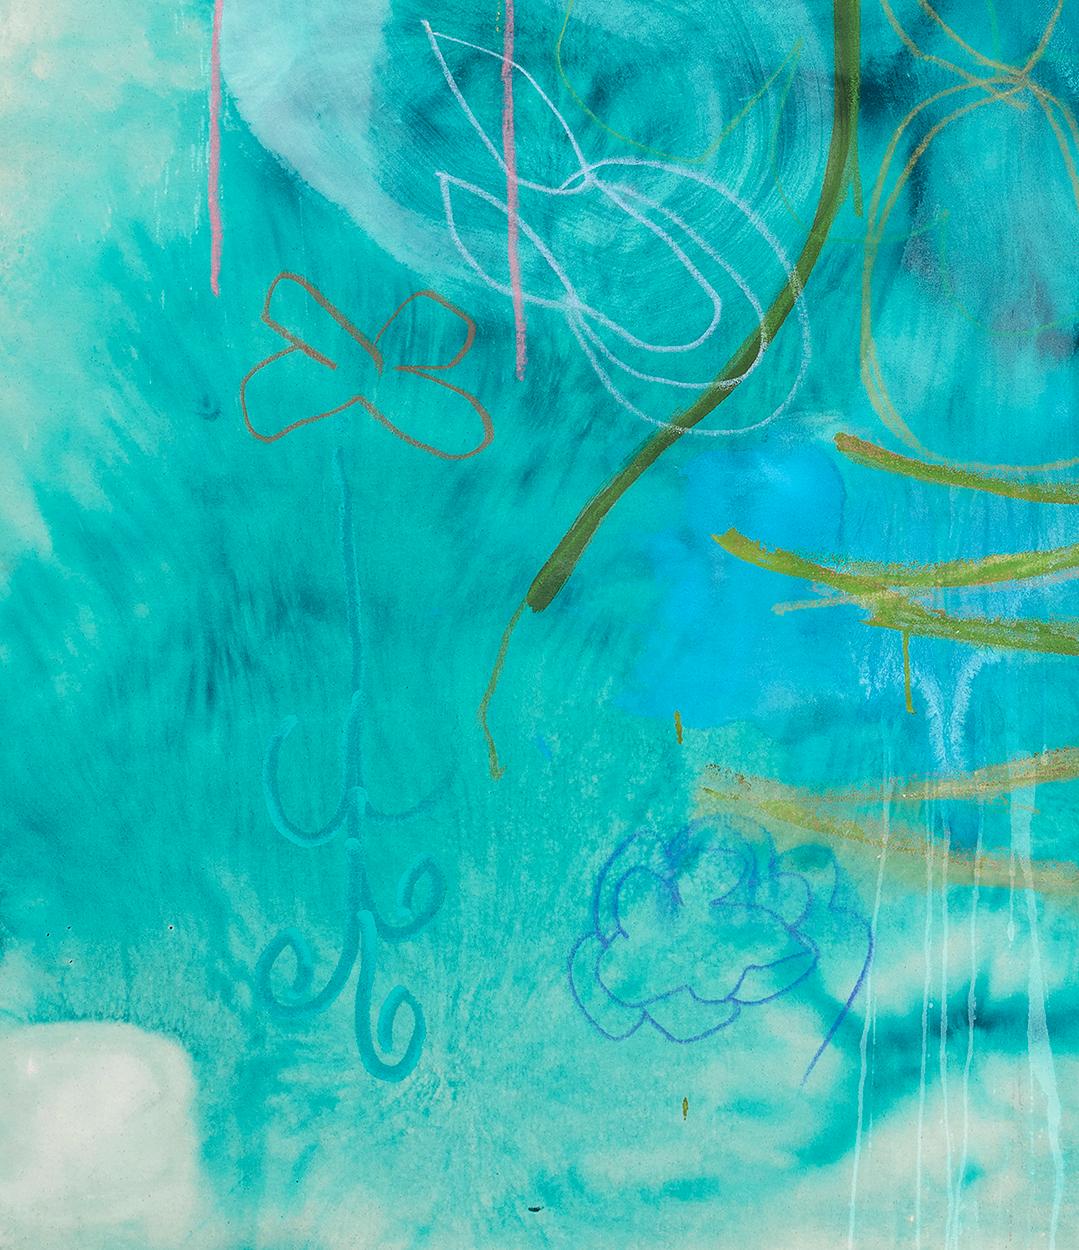 Mixed Media_Floral_Abstract_Turquoise, Blue_Jane Booth, Fleeting Dream, 2022 For Sale 2